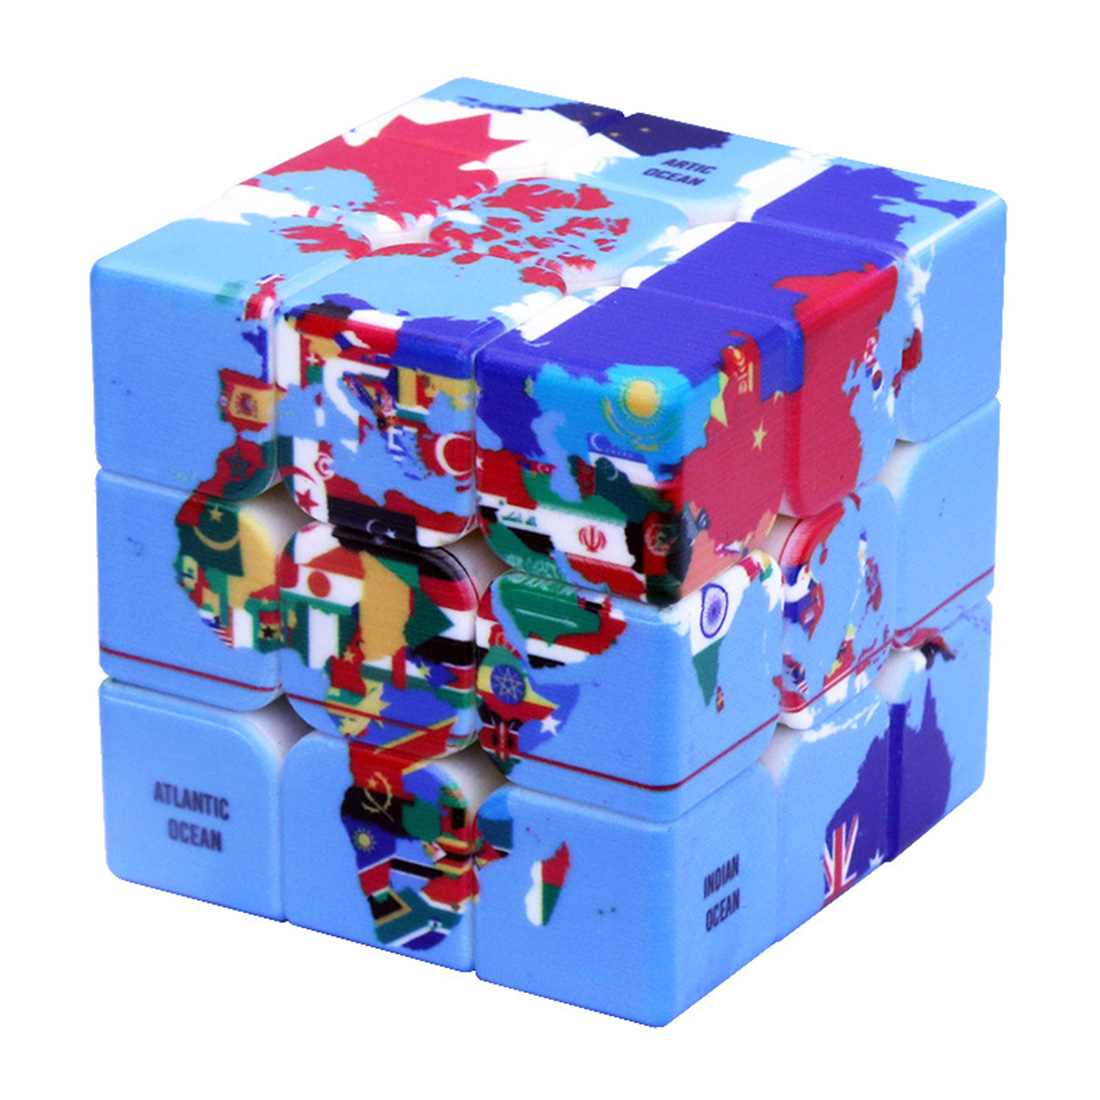 Fangmo World Maps With National Flags 3x3 Magic Cube